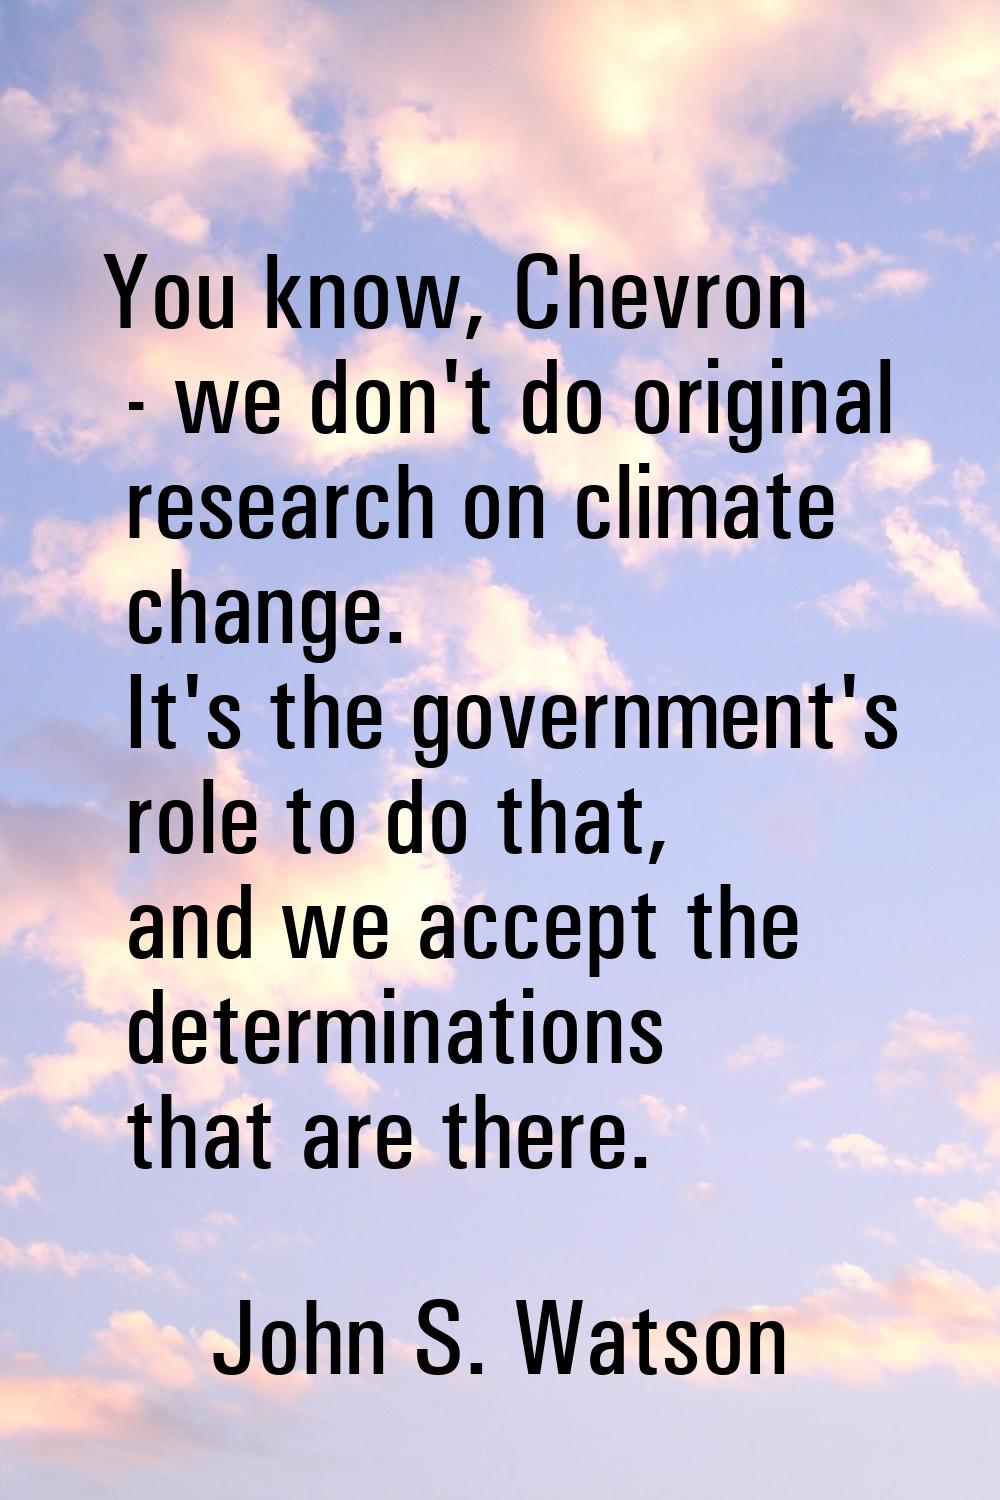 You know, Chevron - we don't do original research on climate change. It's the government's role to 